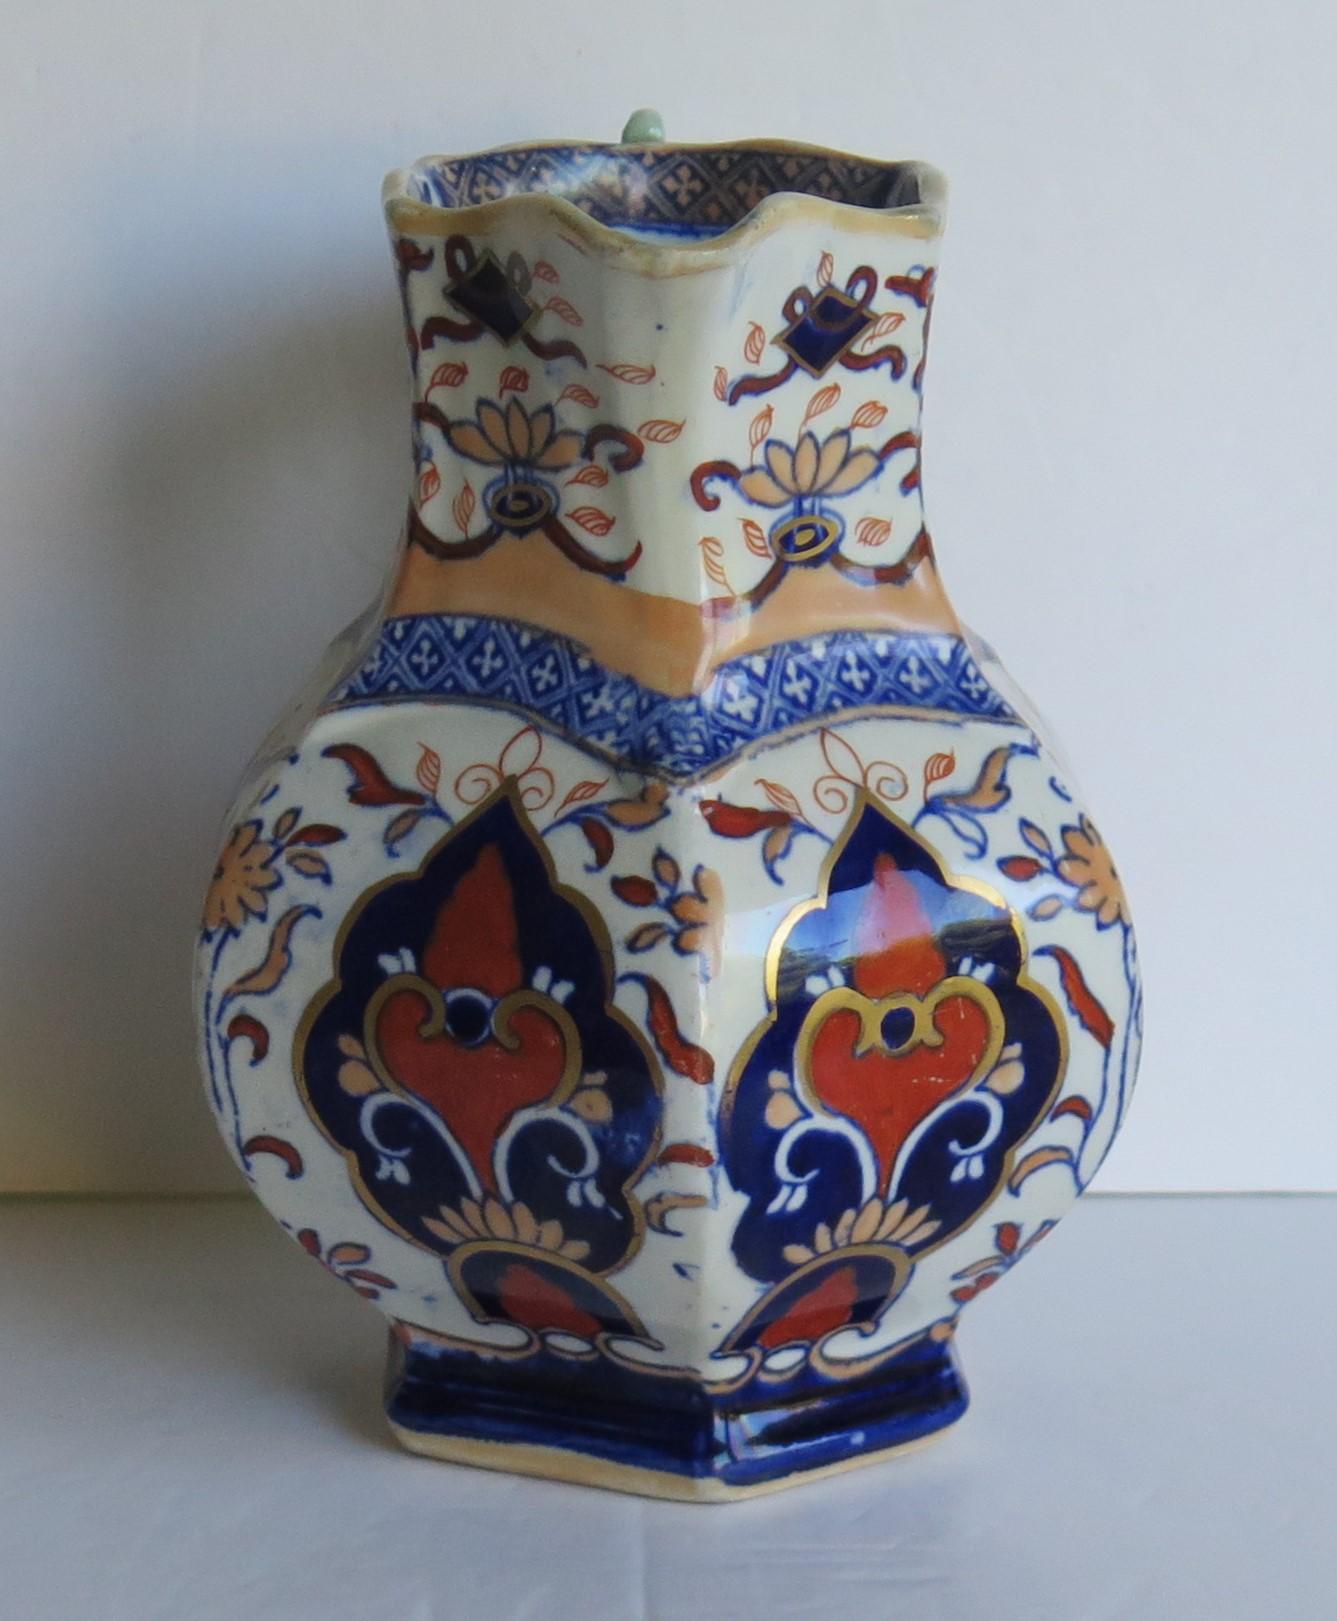 19th Century Mason's Ironstone Jug or Pitcher in Rare Shape and Pattern 306, circa 1830